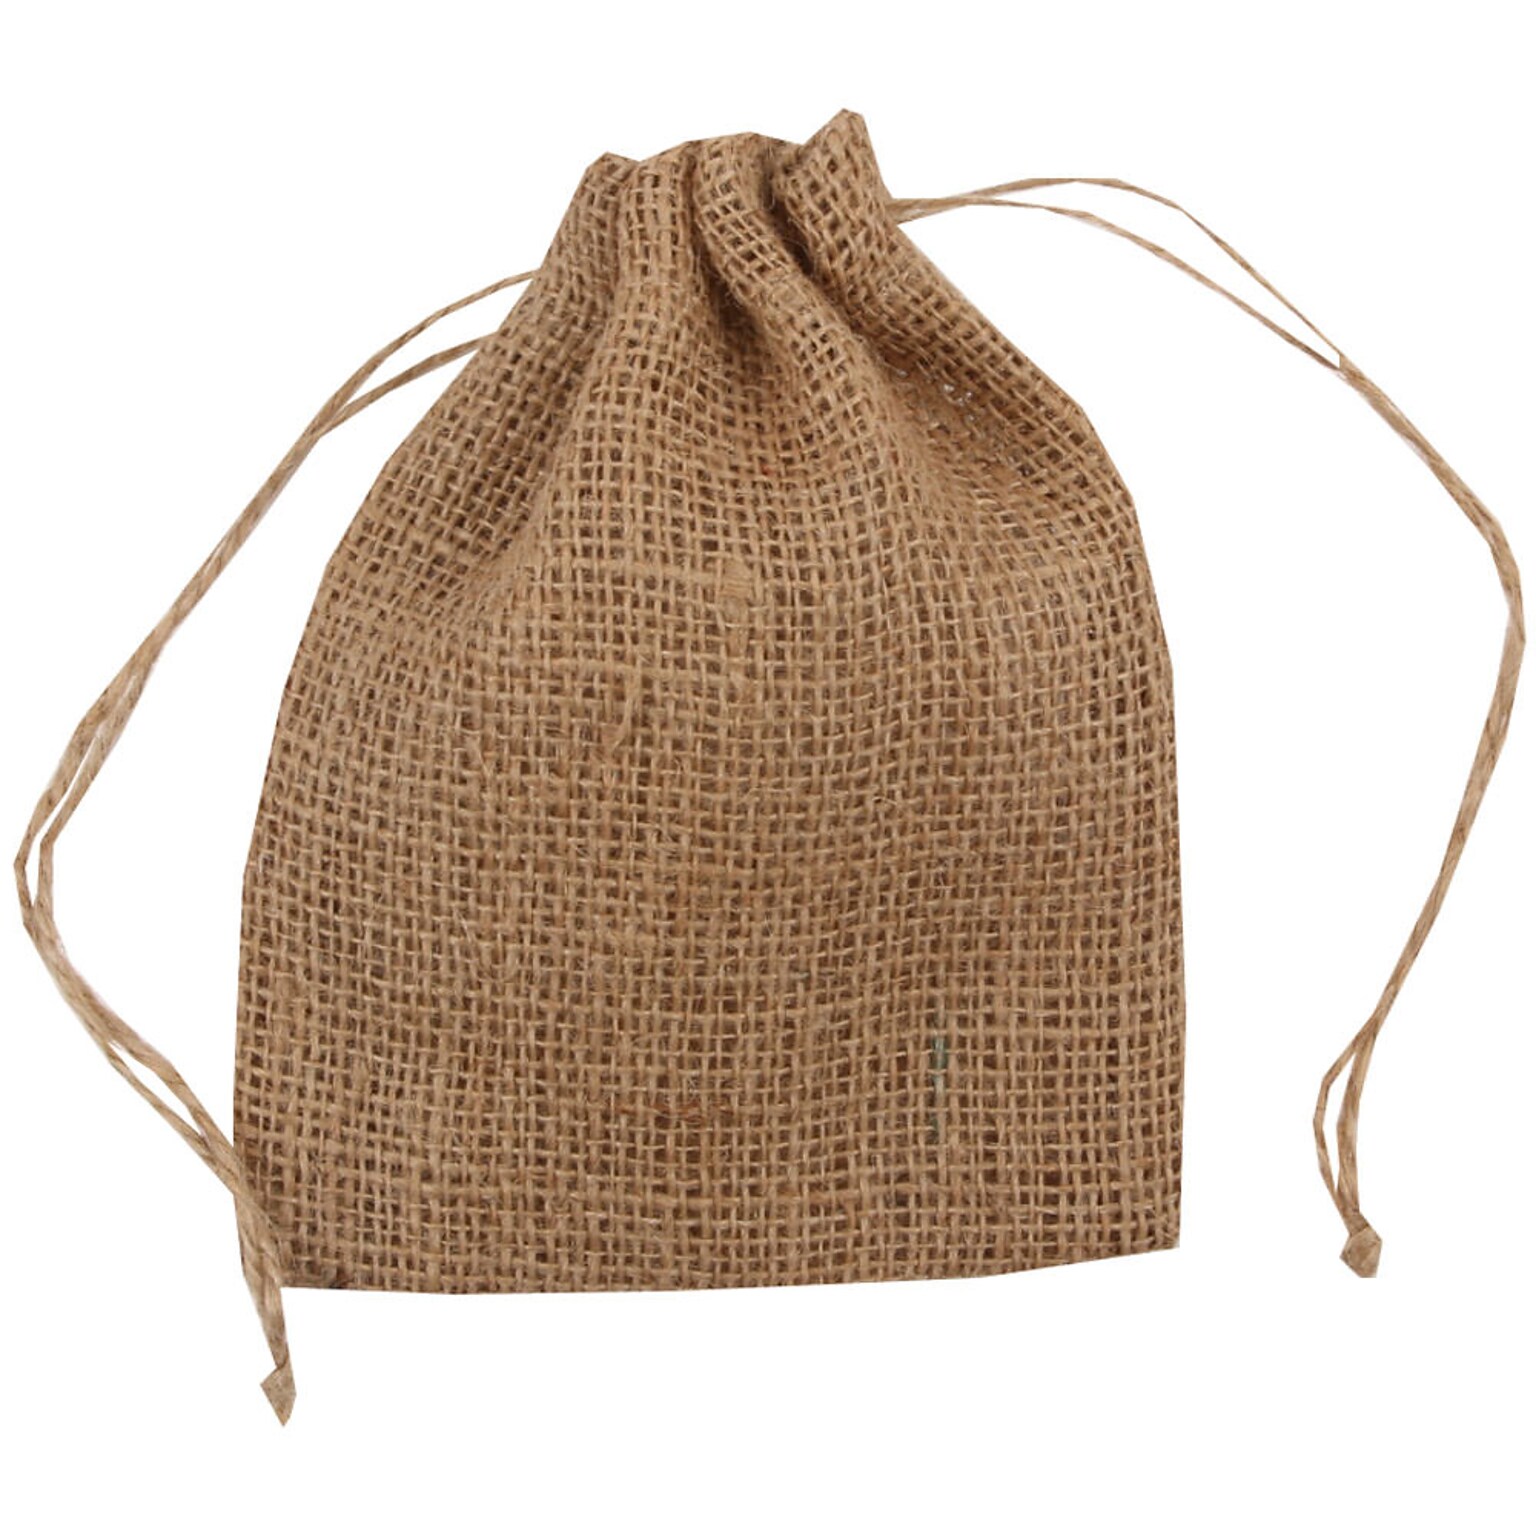 JAM PAPER Burlap Pouches with Drawstring, 5 x 6 1/2- Natural Brown Recycled, 6 Pouches/Pack (238126913C)